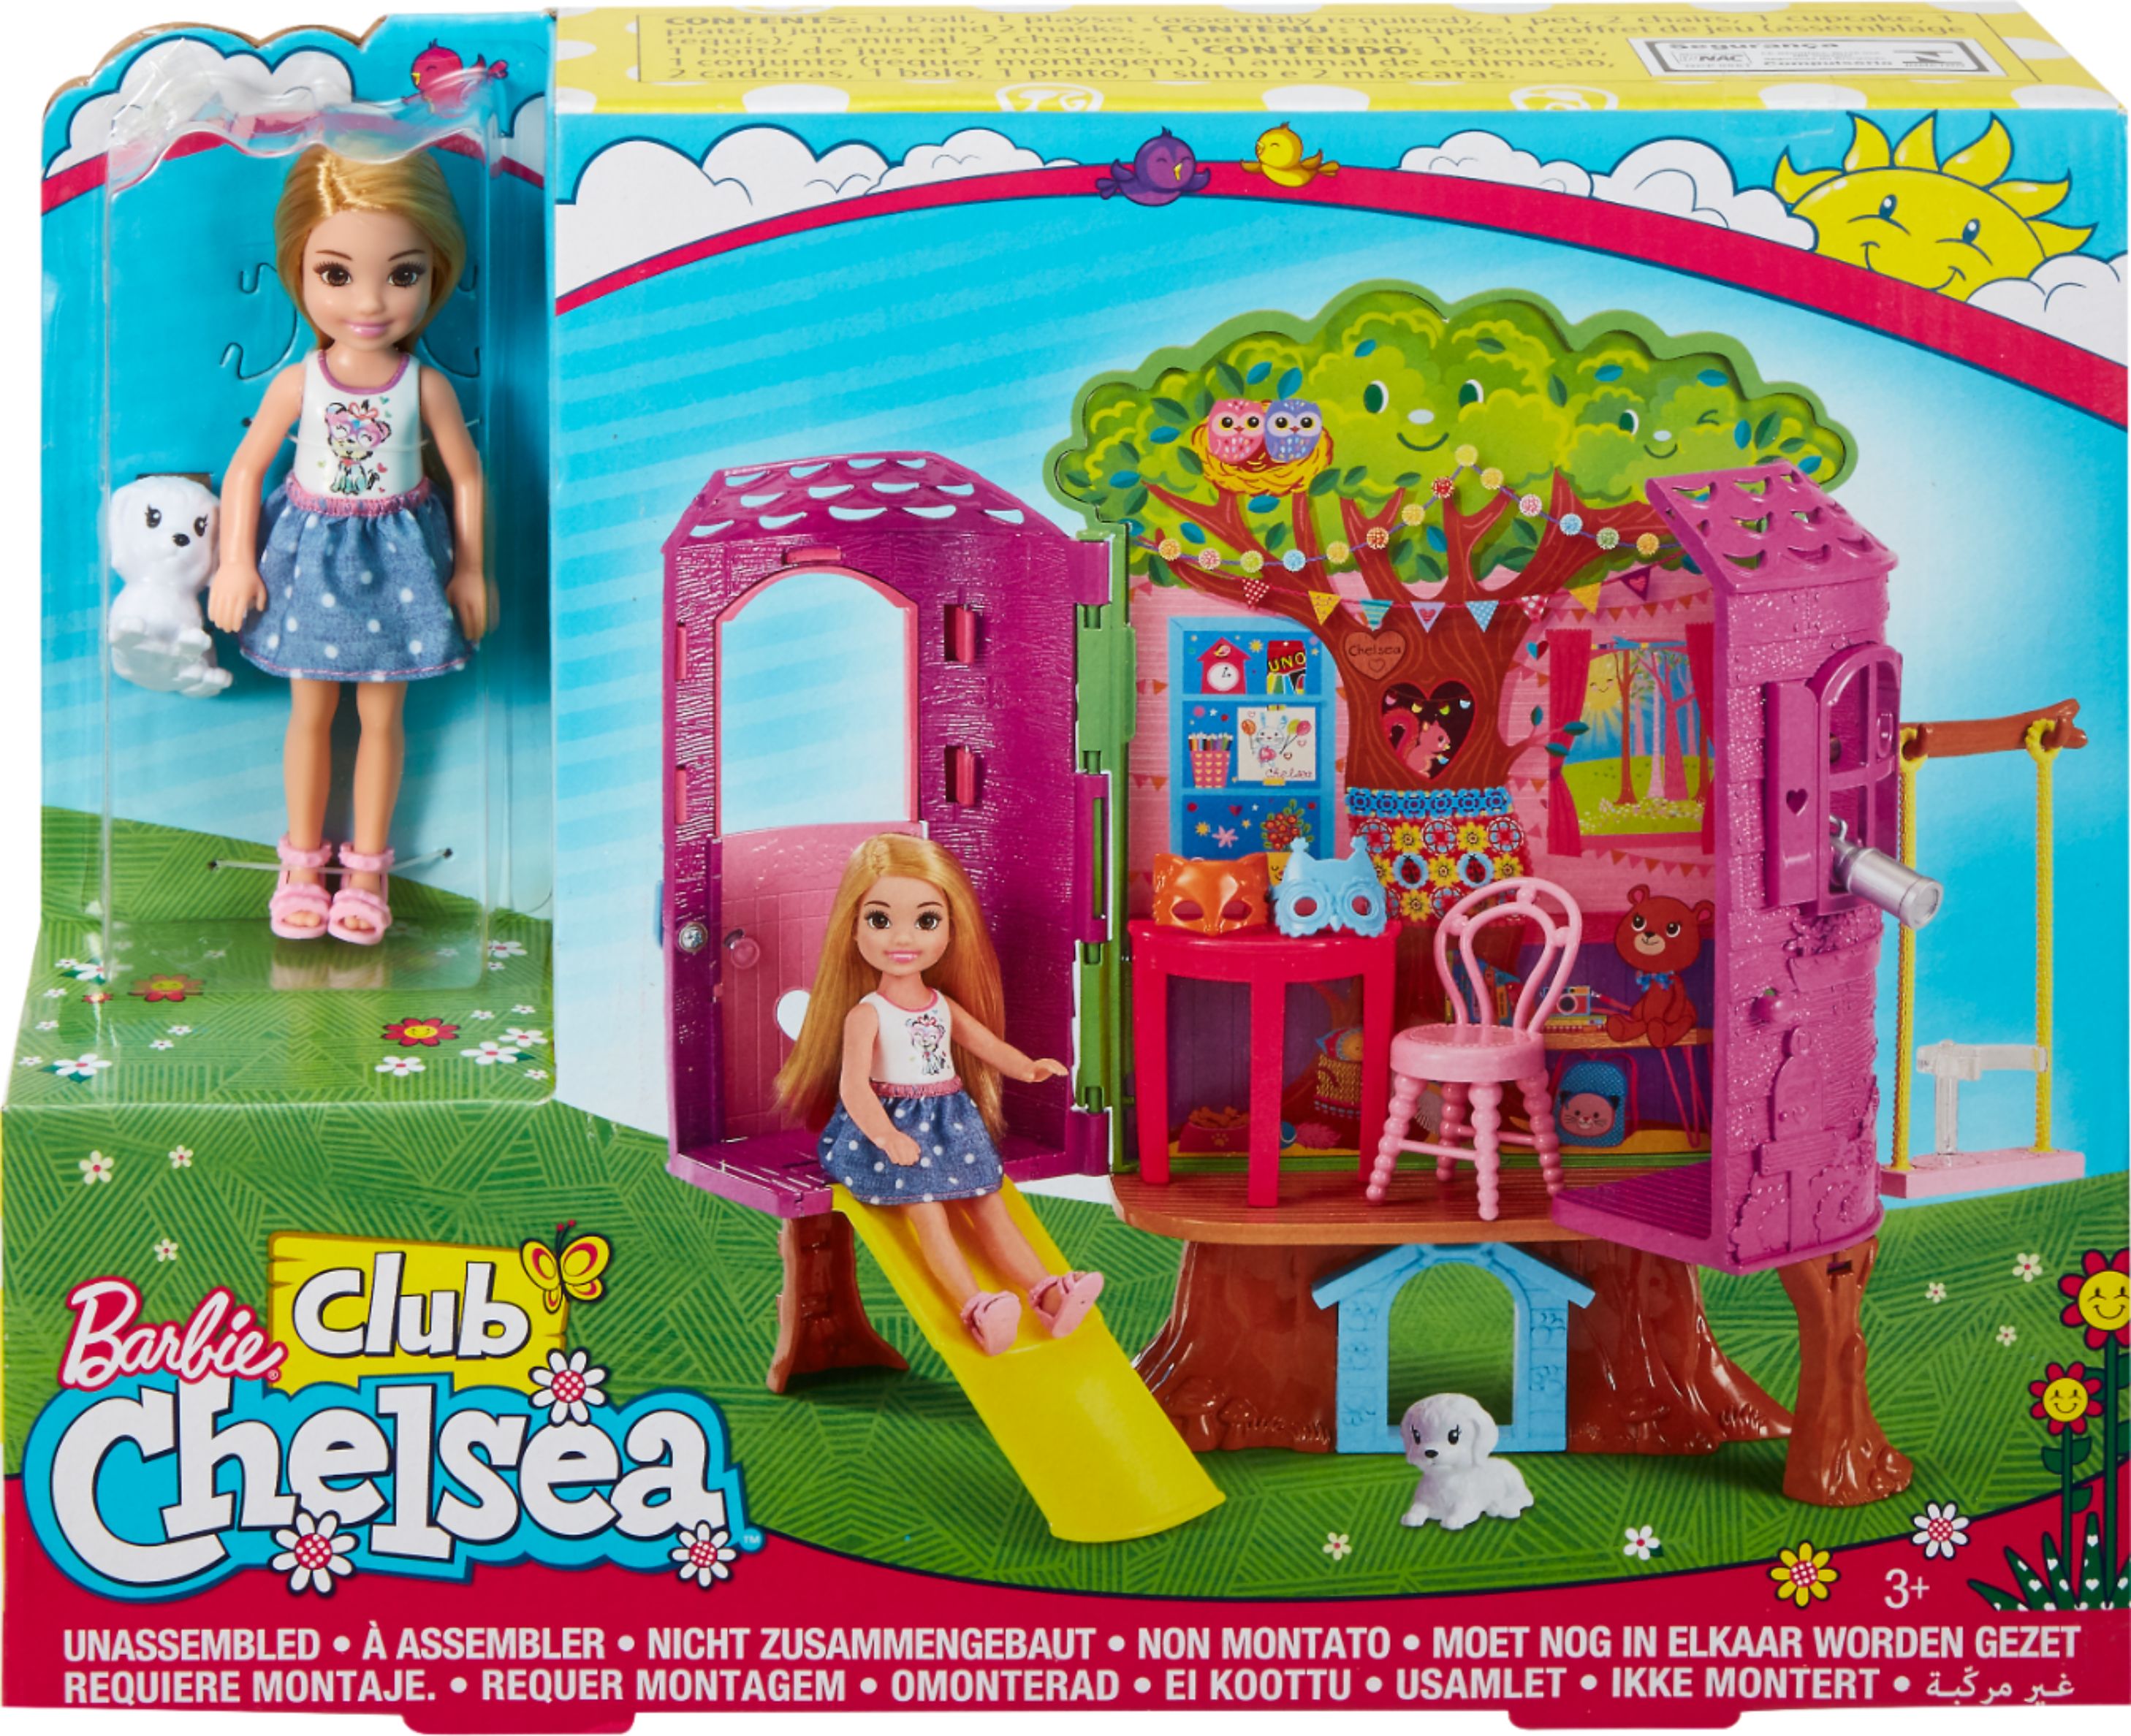 Barbie Chelsea Doll & Accessories HGT09